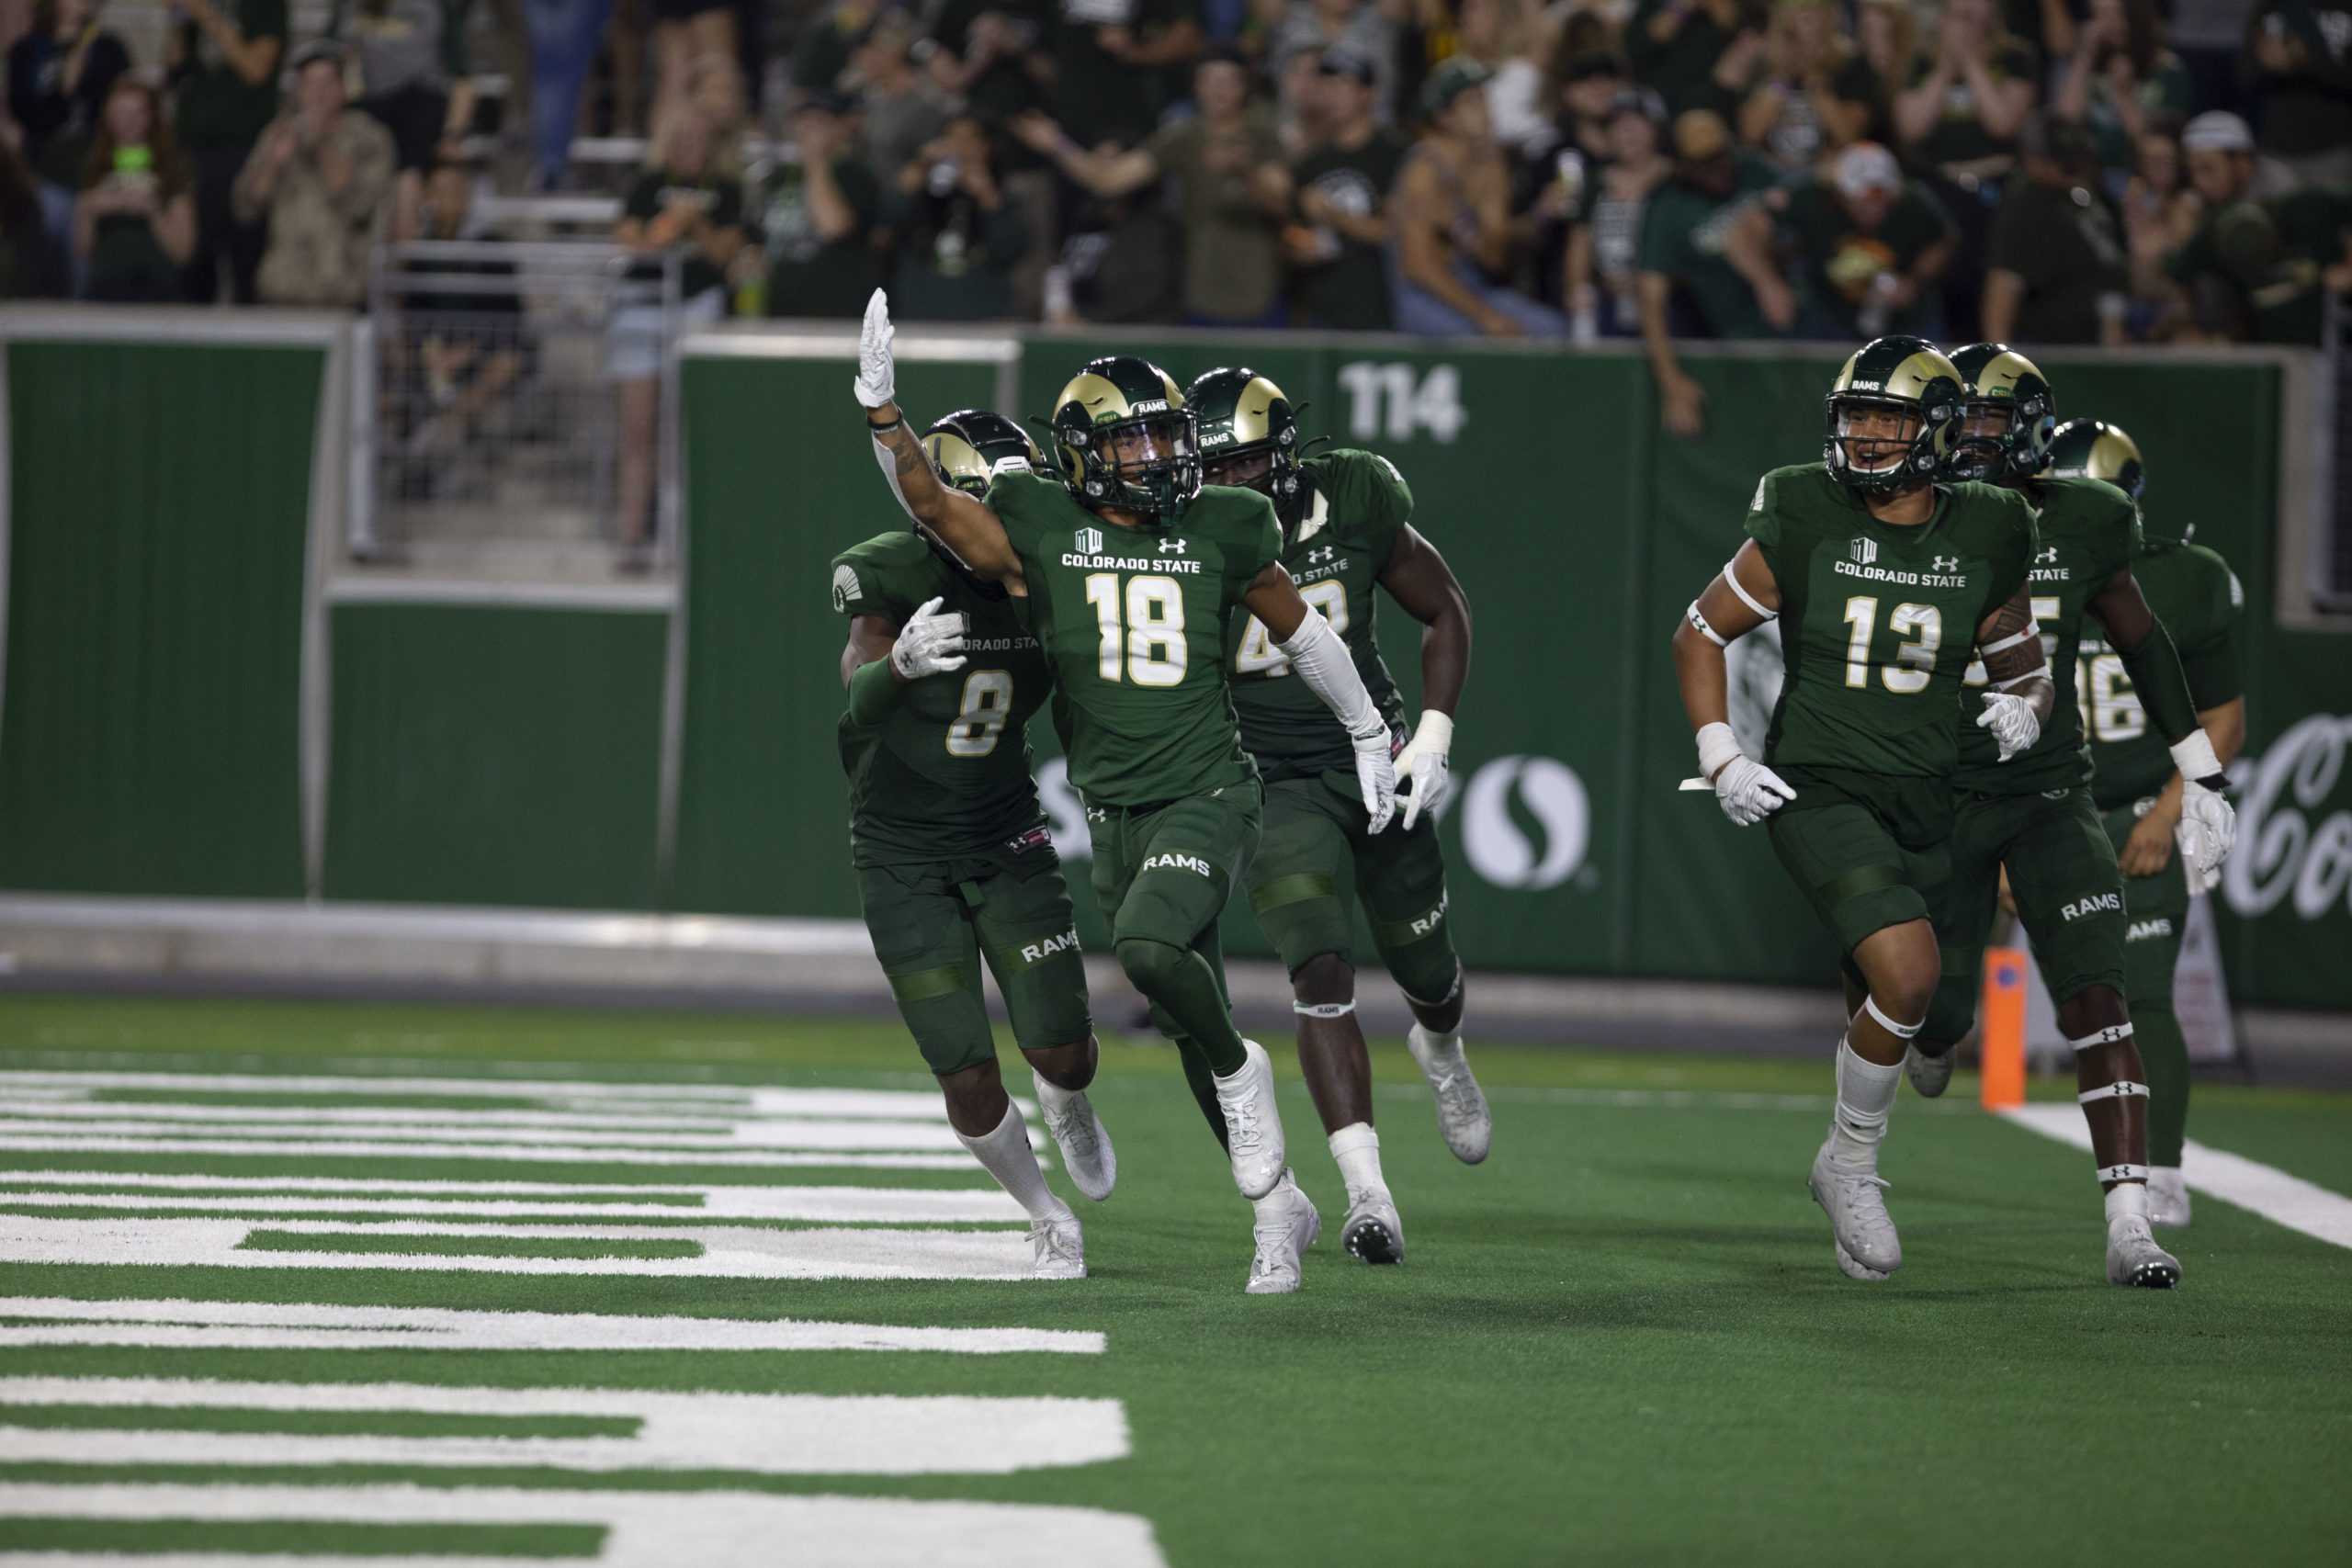 Colorado State wide receiver Thomas Pannunzio celebrates with his teammates after making a tackle near the end zone on a punt return